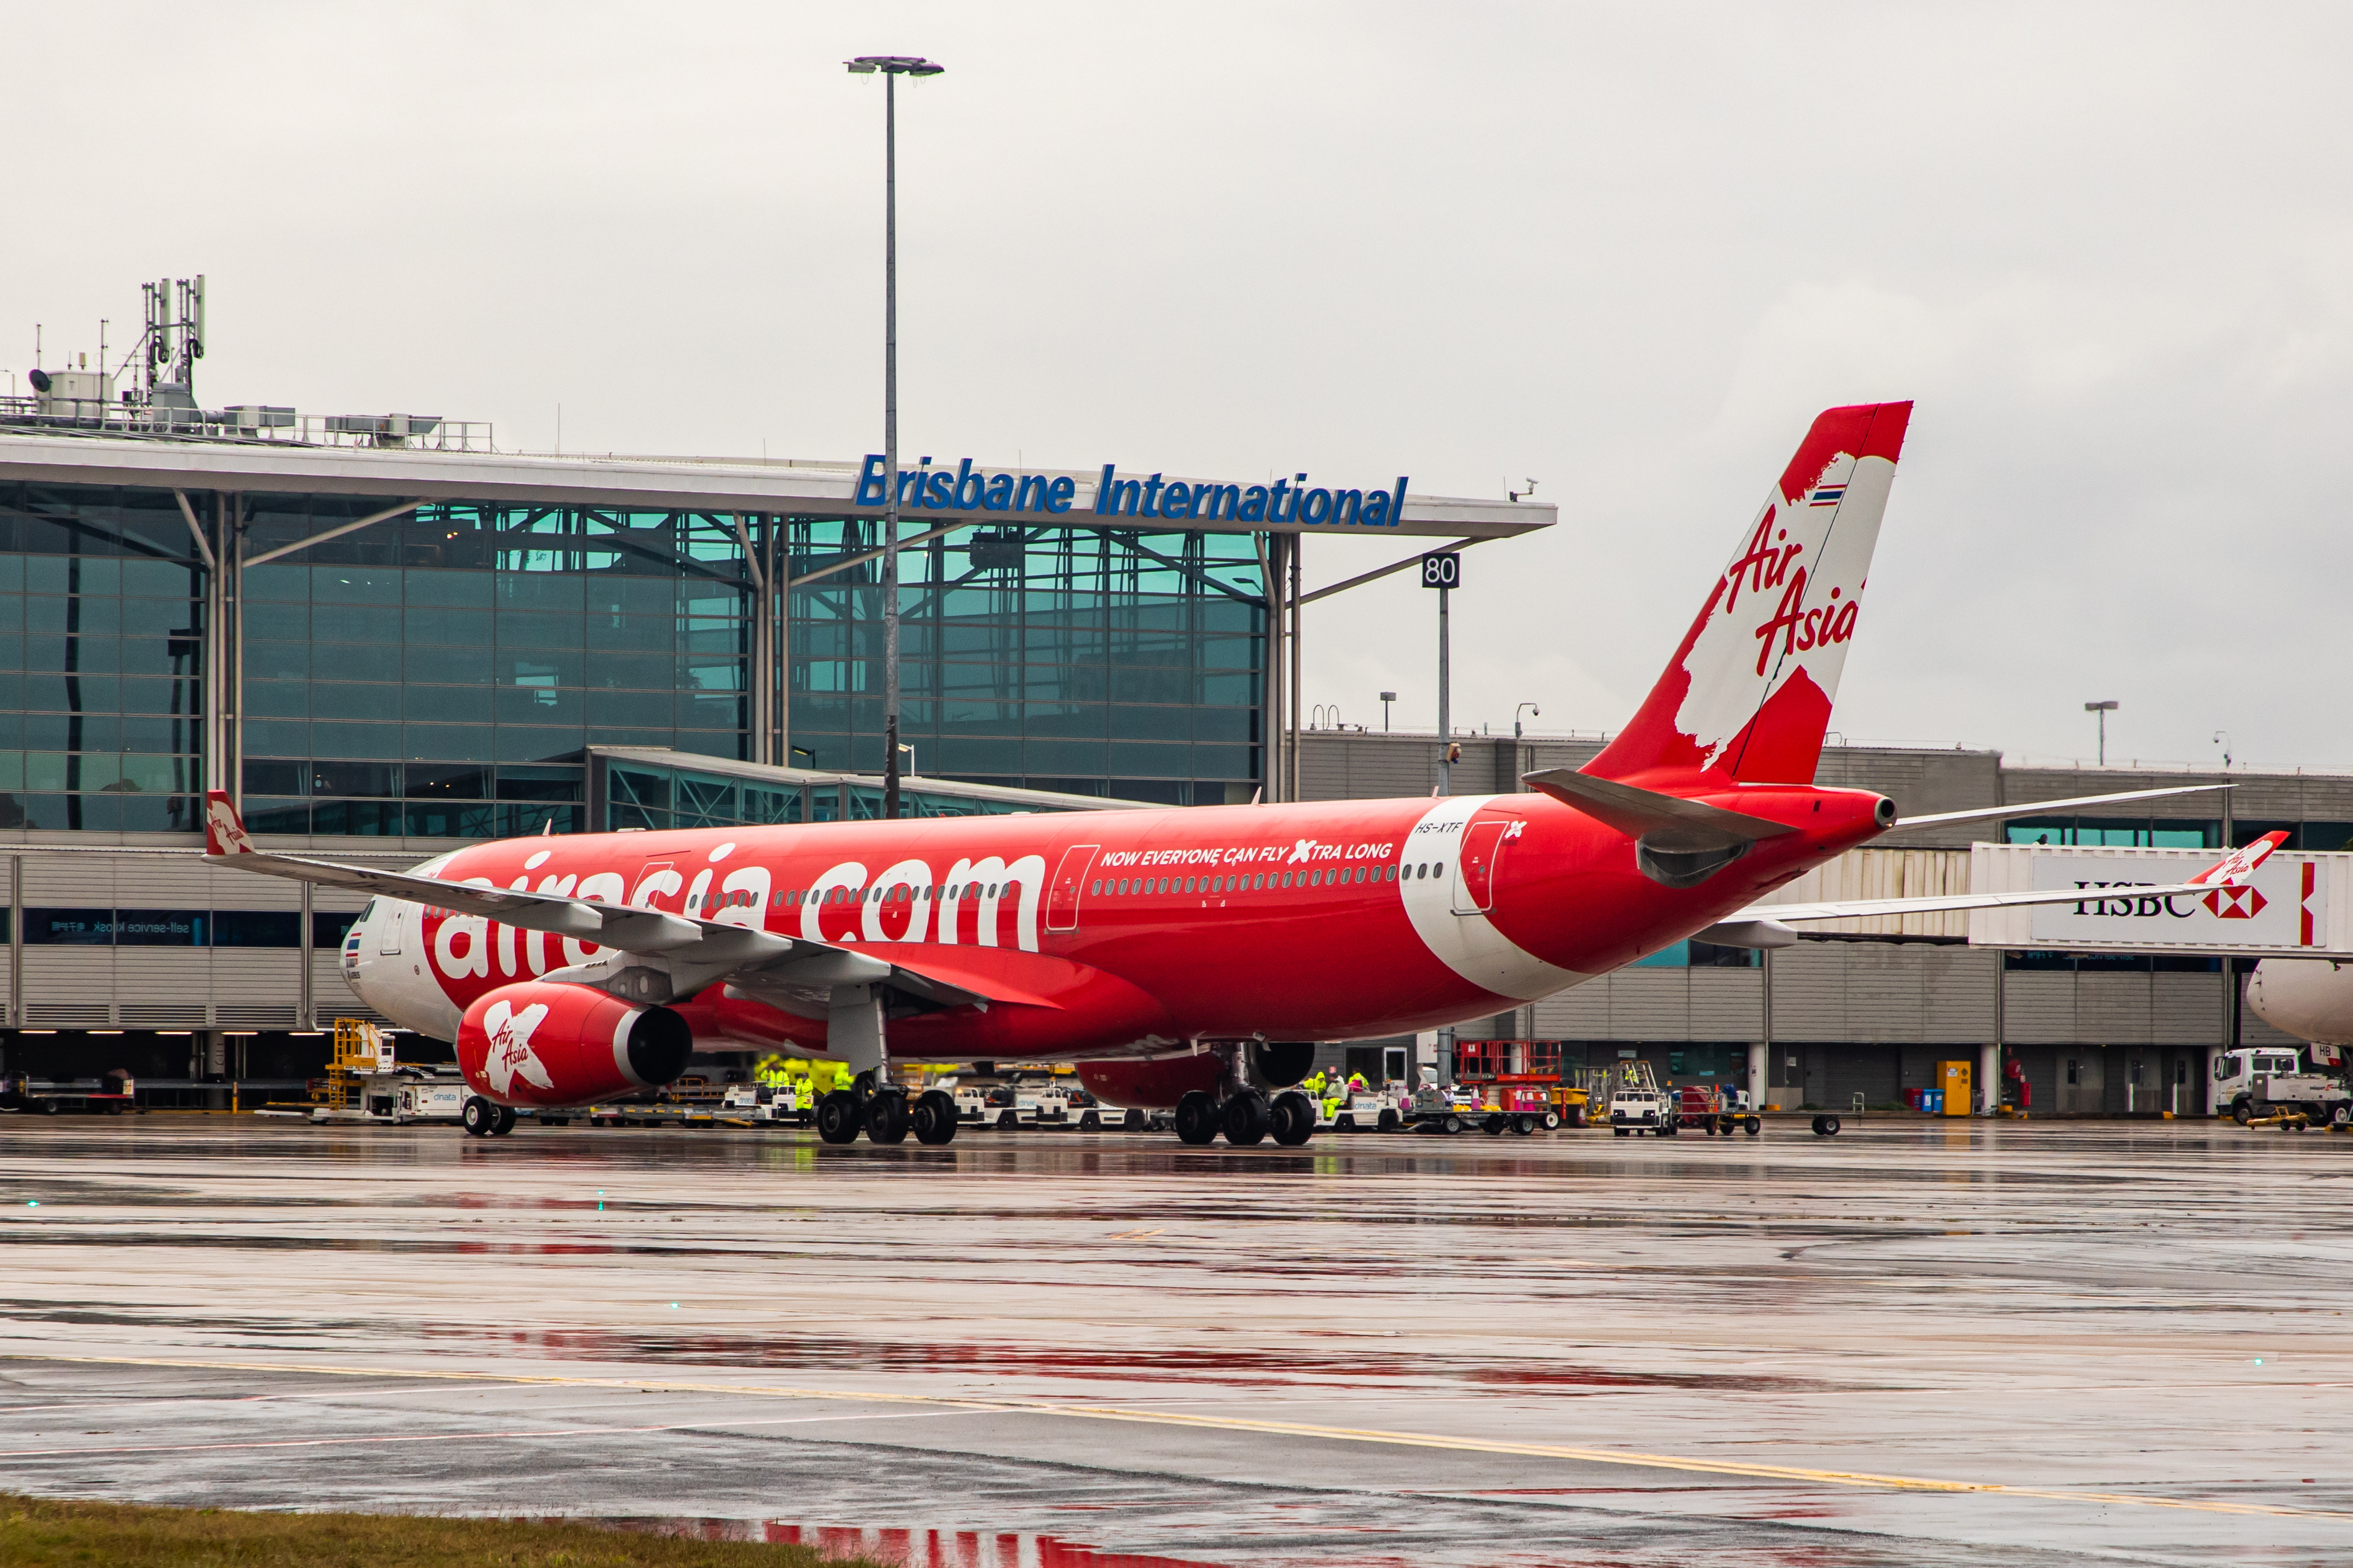 Air Asia Has Commenced Flights From Brisbane To Bangkok